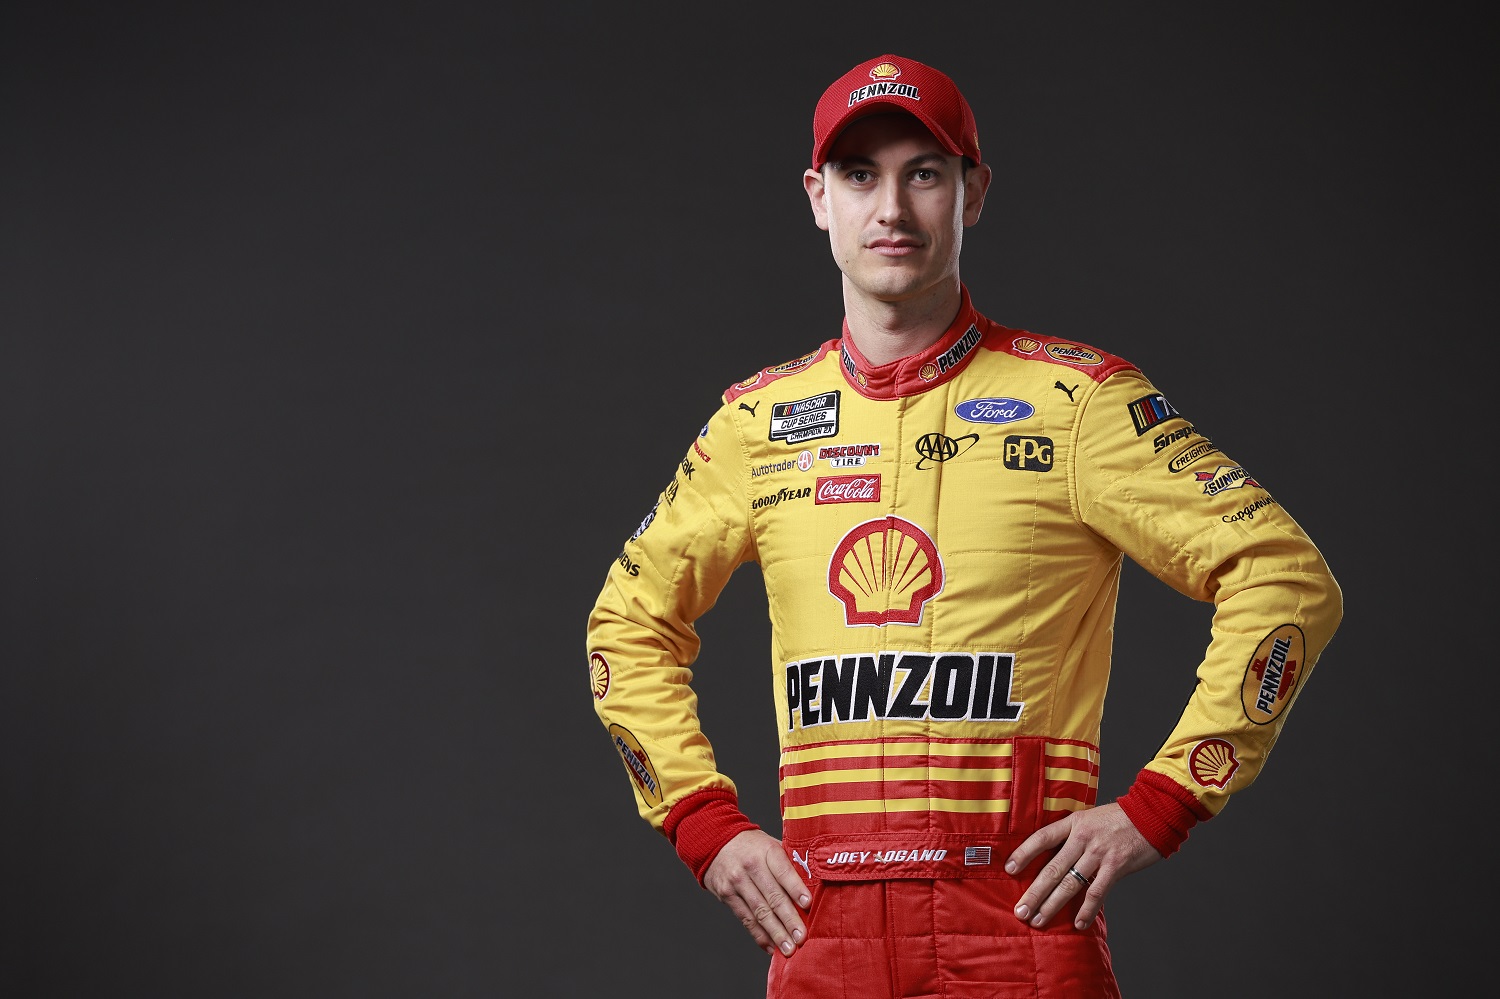 Joey Logano Has Been Snubbed Again by the People Who Should Know NASCAR Best